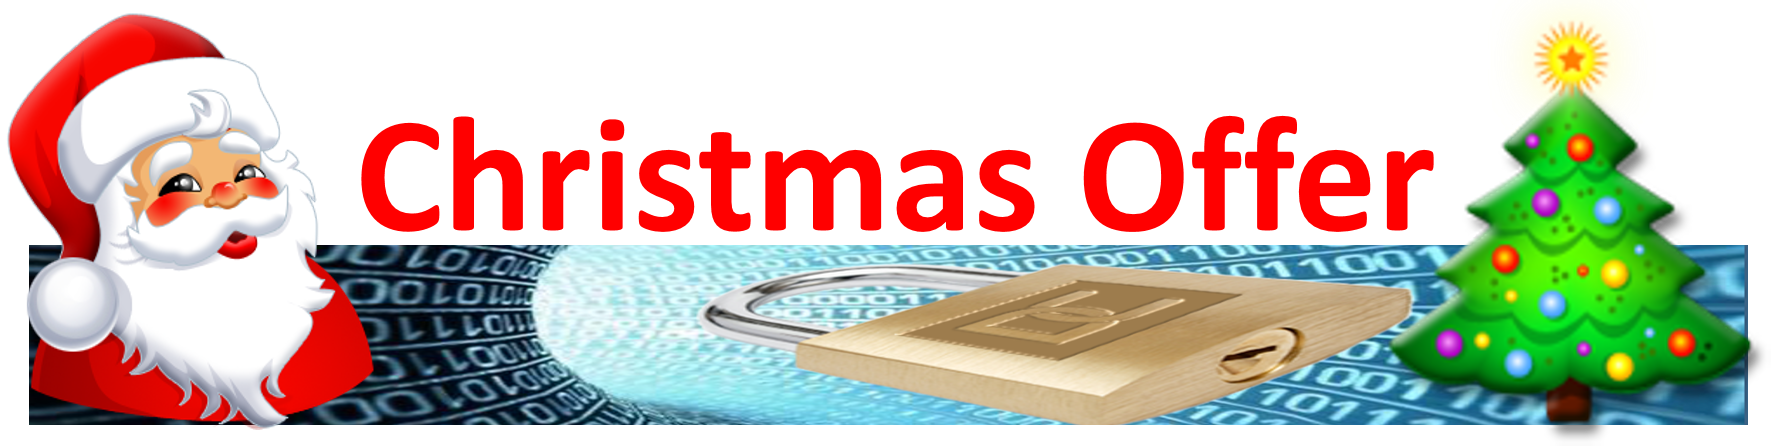 Christmas Offer Promotion Banner PNG